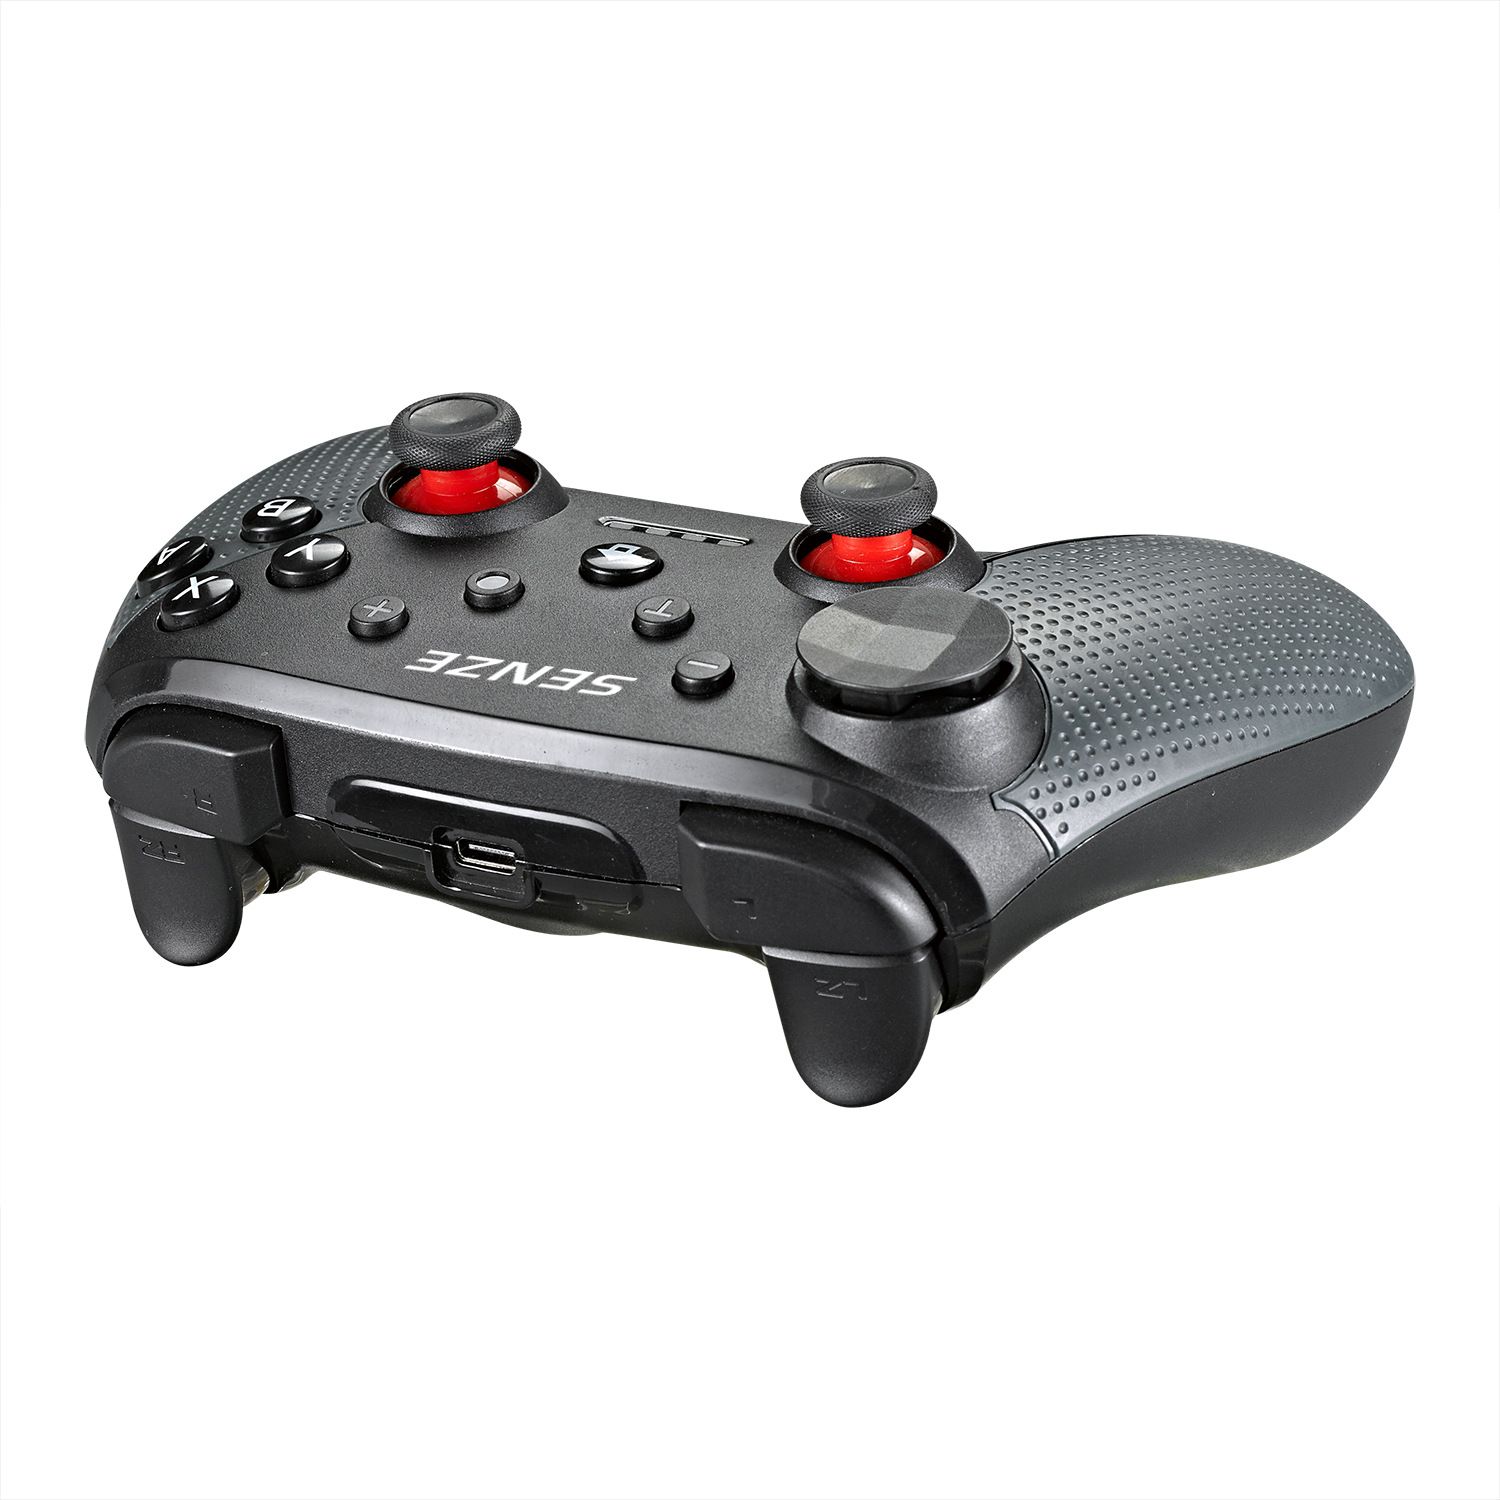 Senze-SZ-912B-bluetooth-Gamepad-for-Nintendo-Switch-Game-Controller-for-Android-for-Playstation-3-PS-1623864